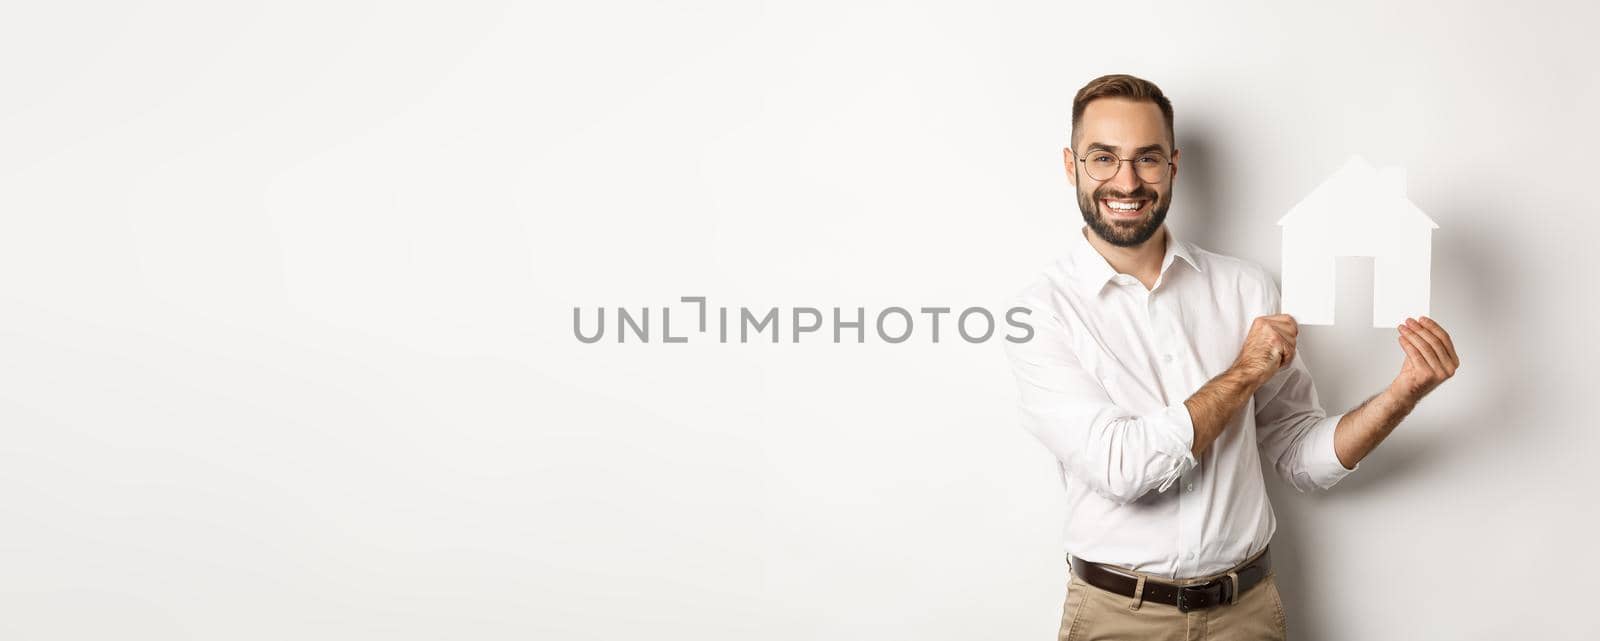 Real estate. Handsome man showing house model and smiling, broker showing apartments, standing over white background.